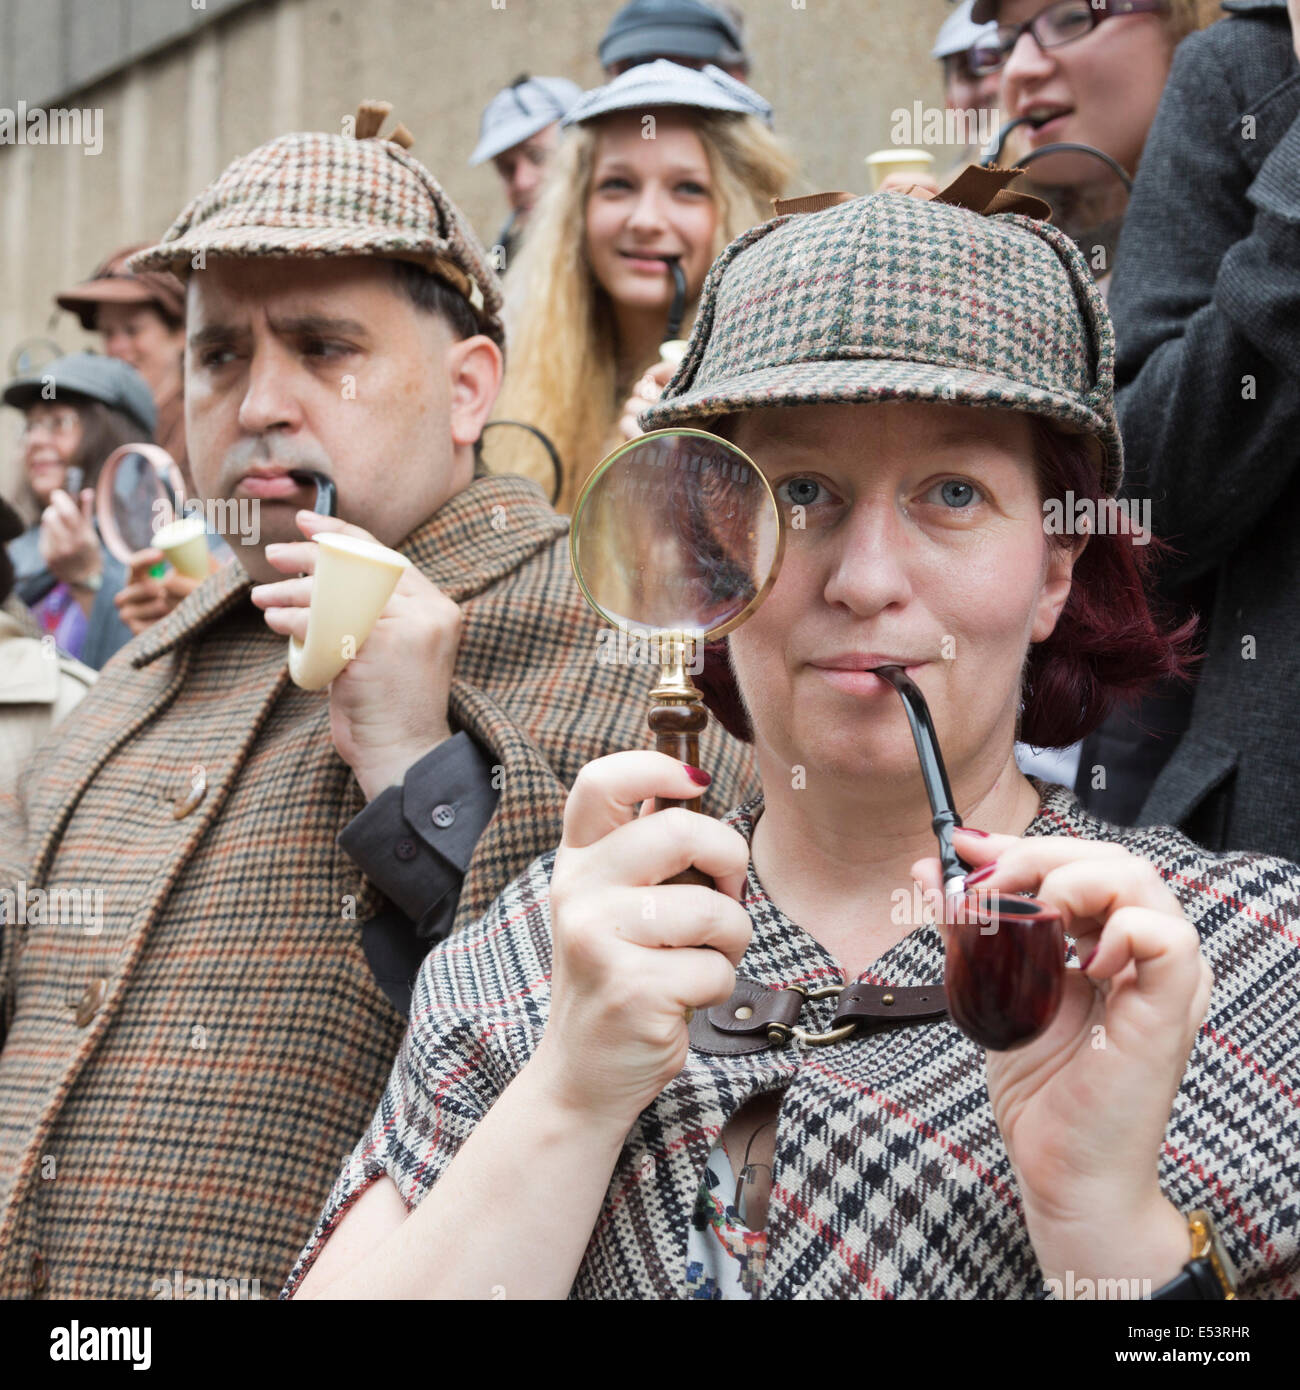 Dozens of fans dressed as Sherlock Holmes created by Sir Arthur Conan Doyle in a Guinness World Record Attempt in London. Stock Photo